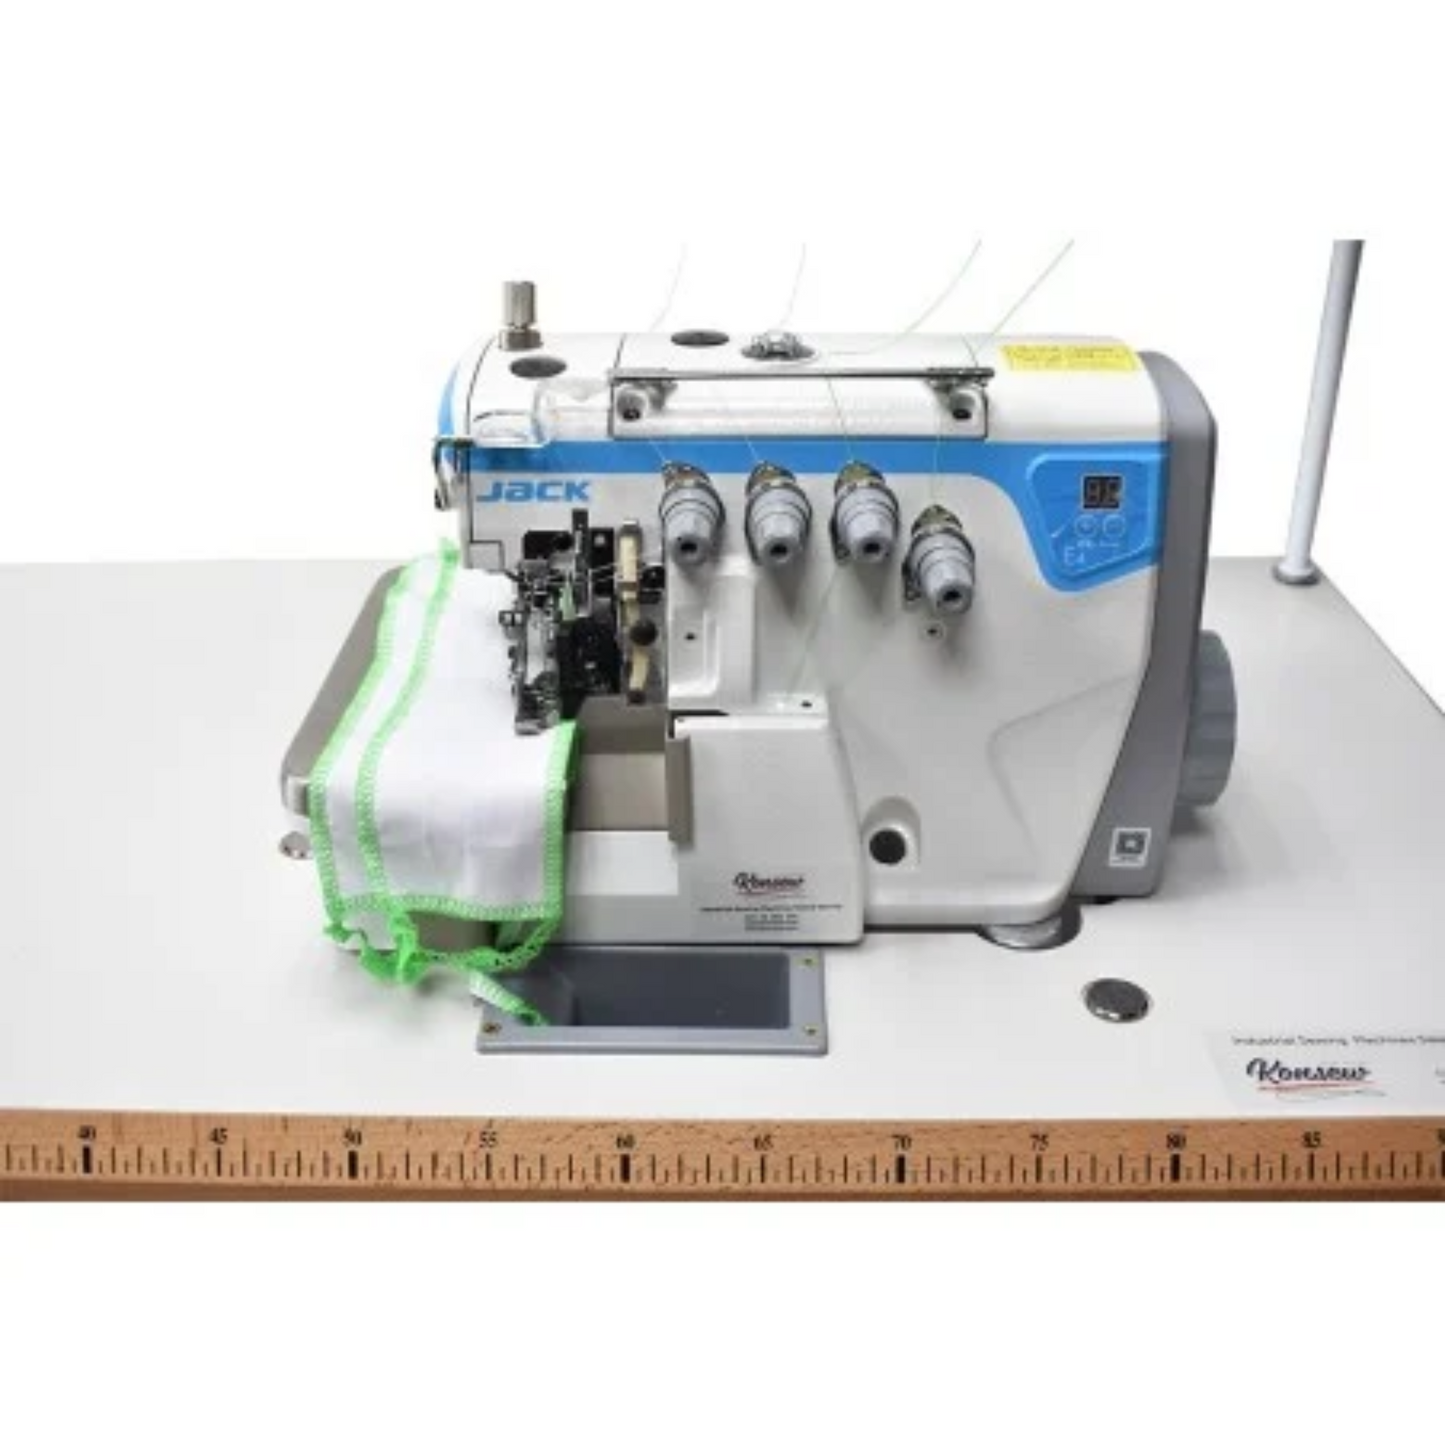 Jack E4 4 thread overlock sewing machine (direct drive) - Multi color - Front view